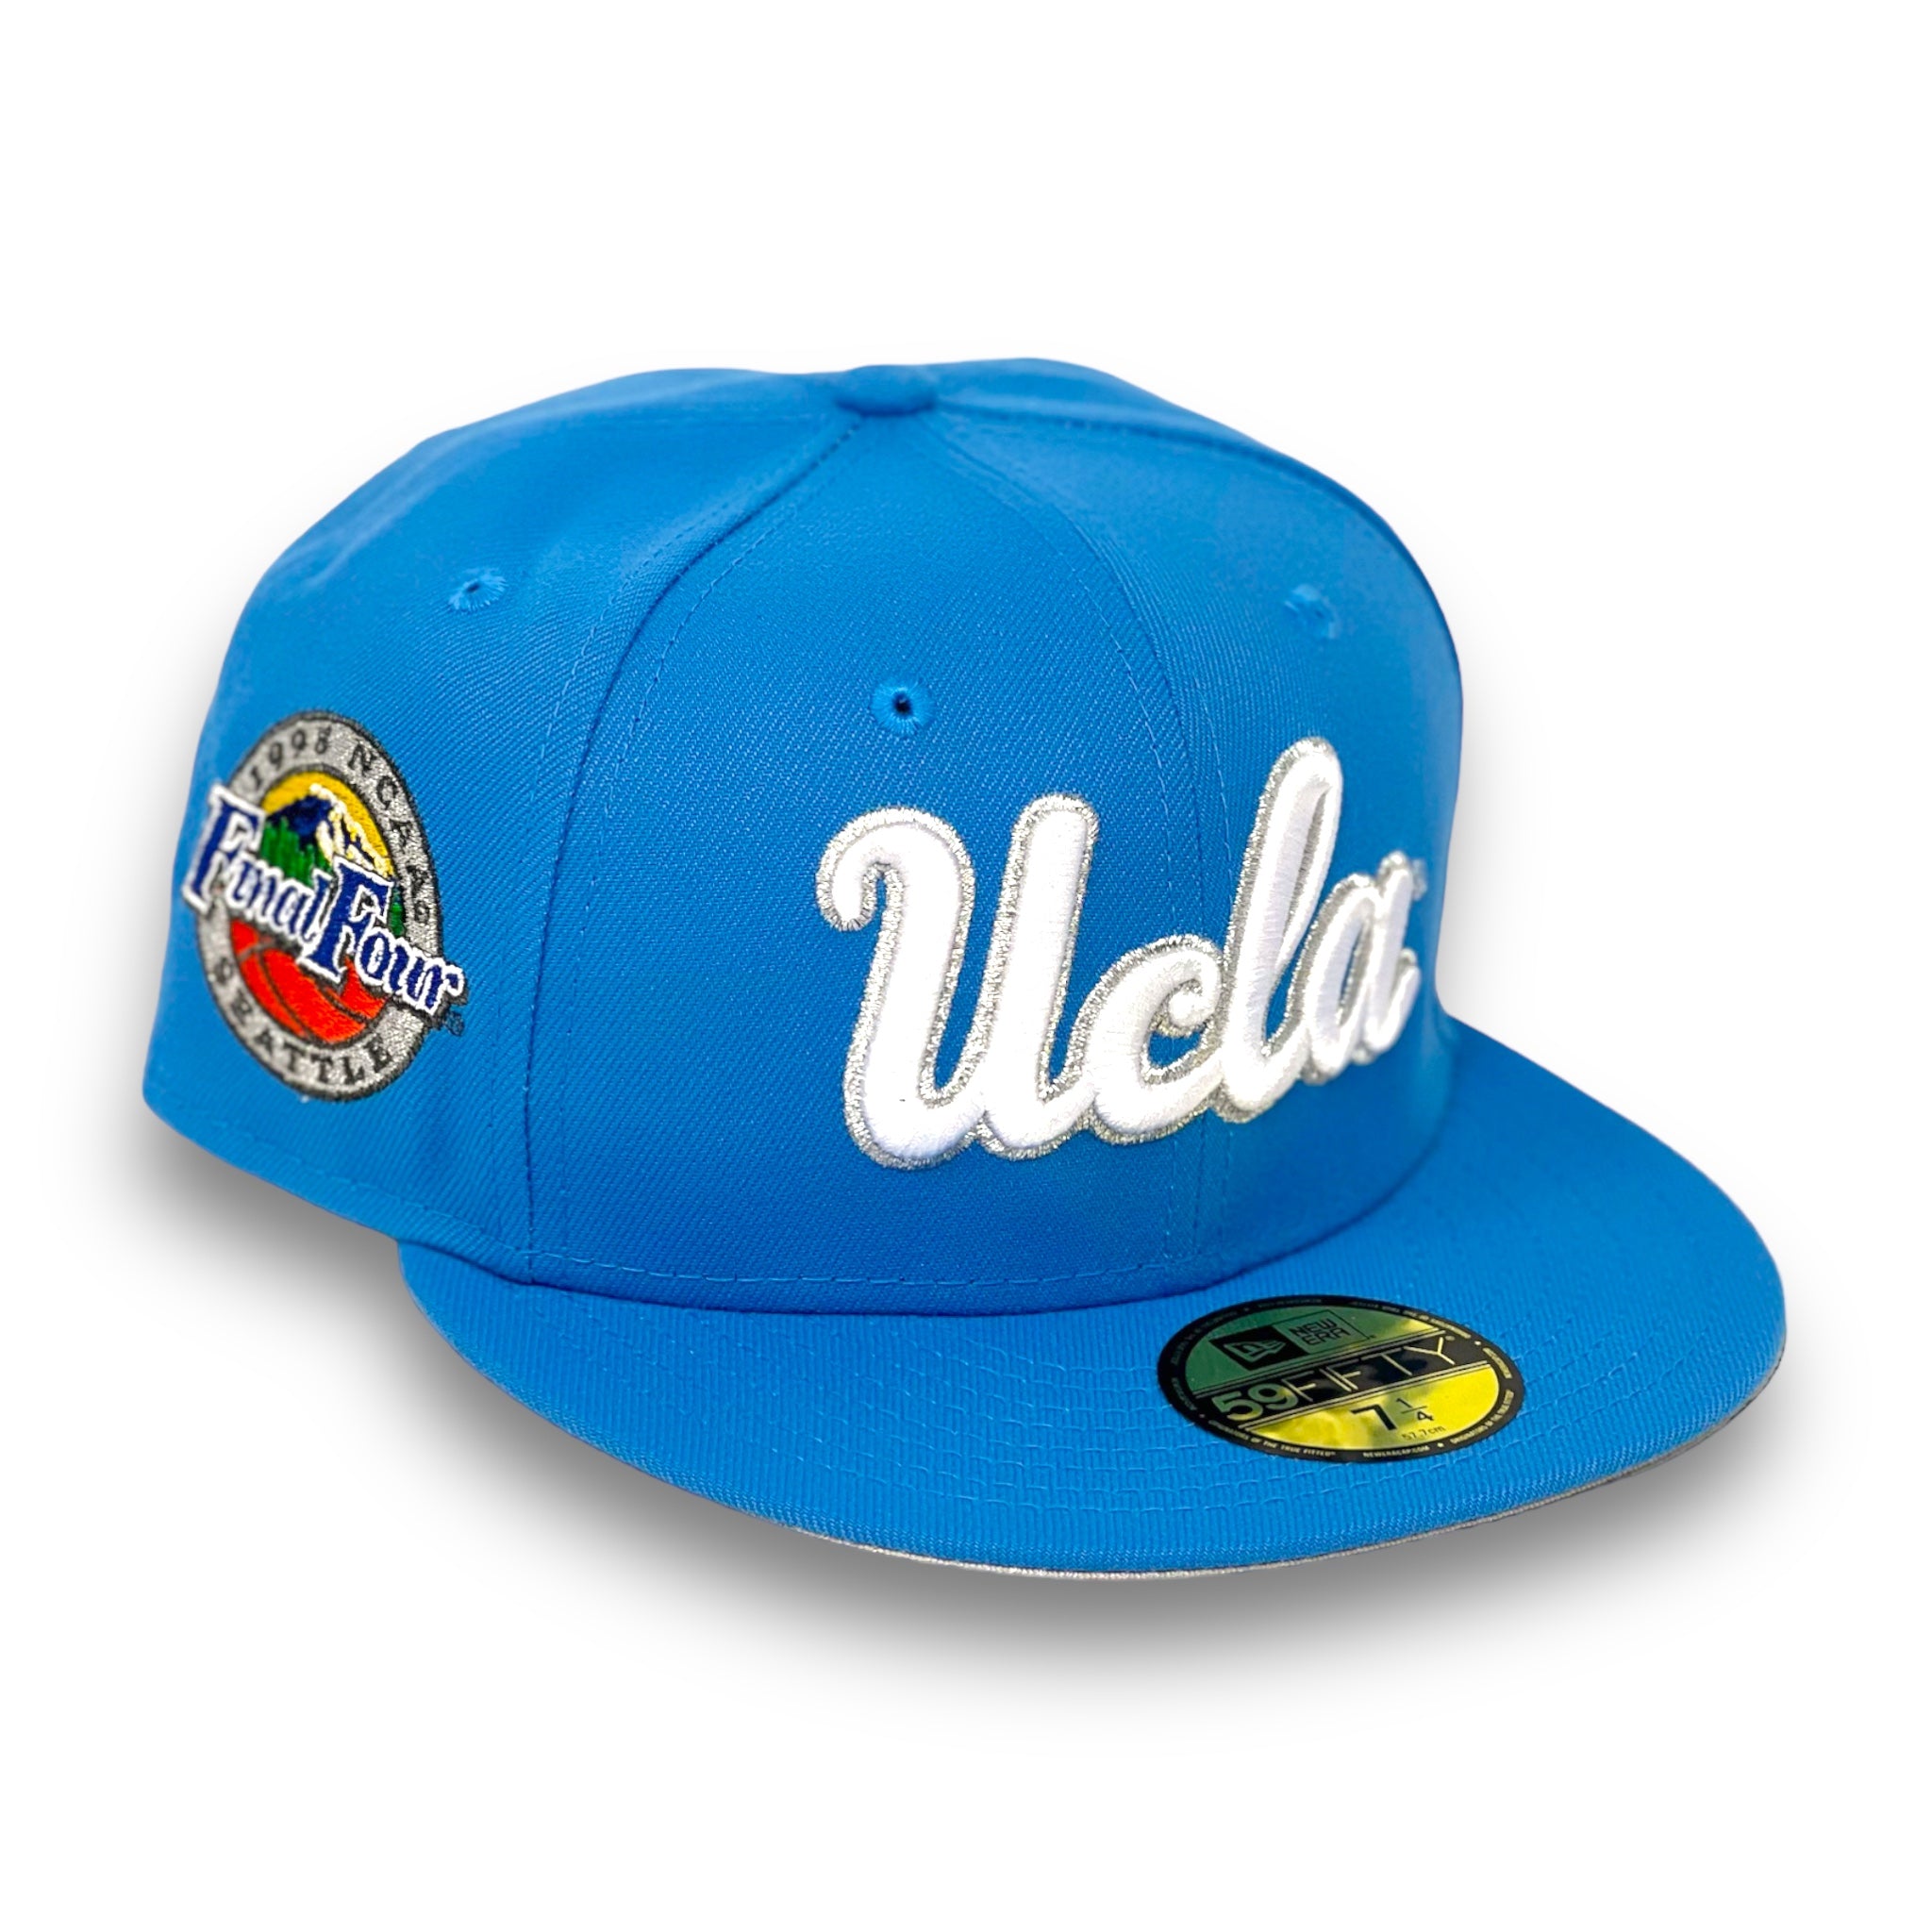 UCLA BRUINS (1955 FINAL FOUR) NEW ERA 59FIFTY FITTED